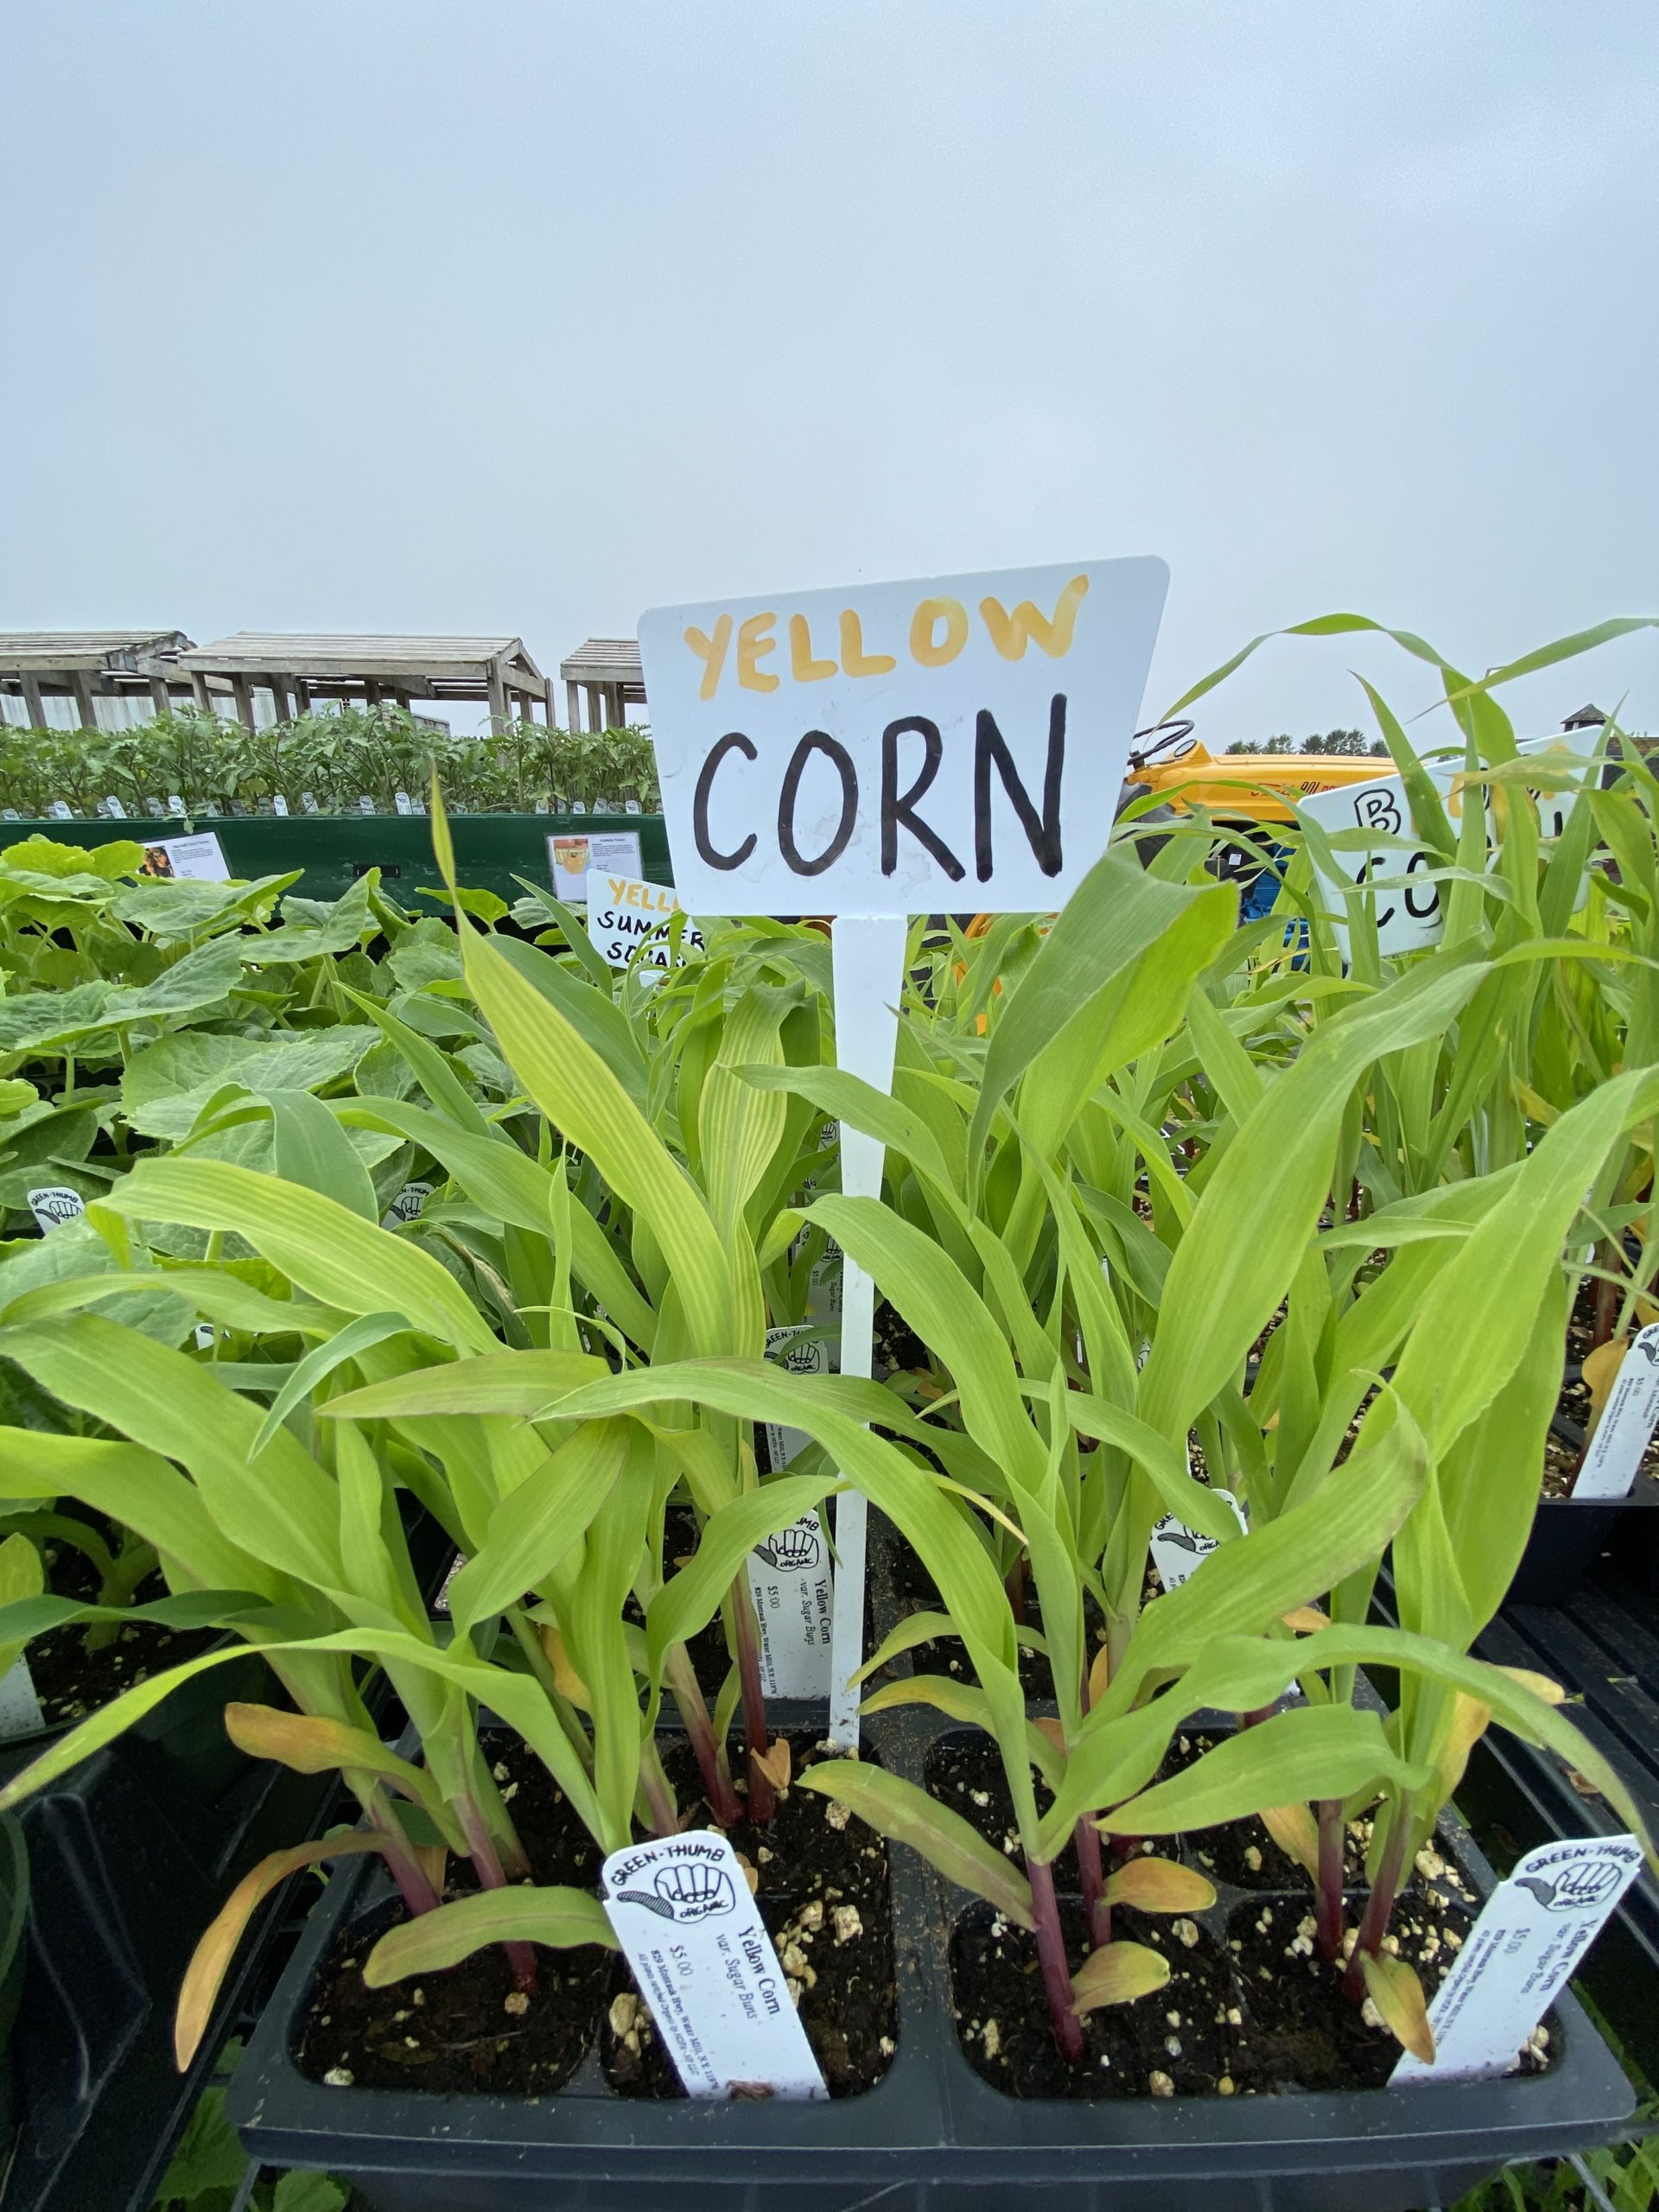 Lots of home gardeners are trying their hands with new varieties this year, including sweet corn.